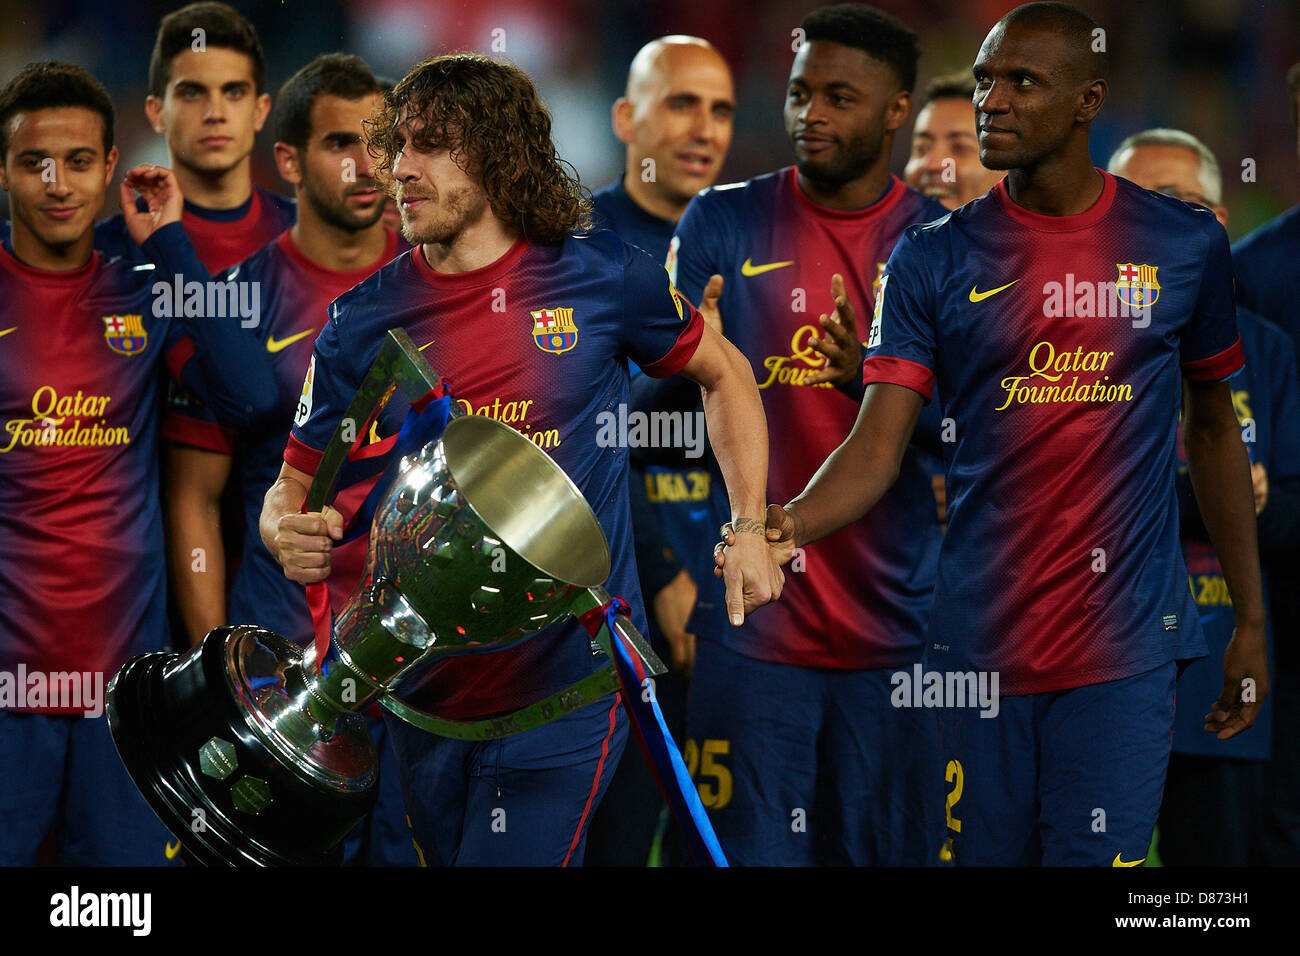 Carles Puyol (FC Barcelona) holds the La Liga Trophy with Eric Abidal (FC Barcelona), after La Liga soccer match between FC Barcelona and Real Valladolid CF, at the Camp Nou stadium in Barcelona, Spain, Sunday, May 19, 2013. Foto: S.Lau Stock Photo